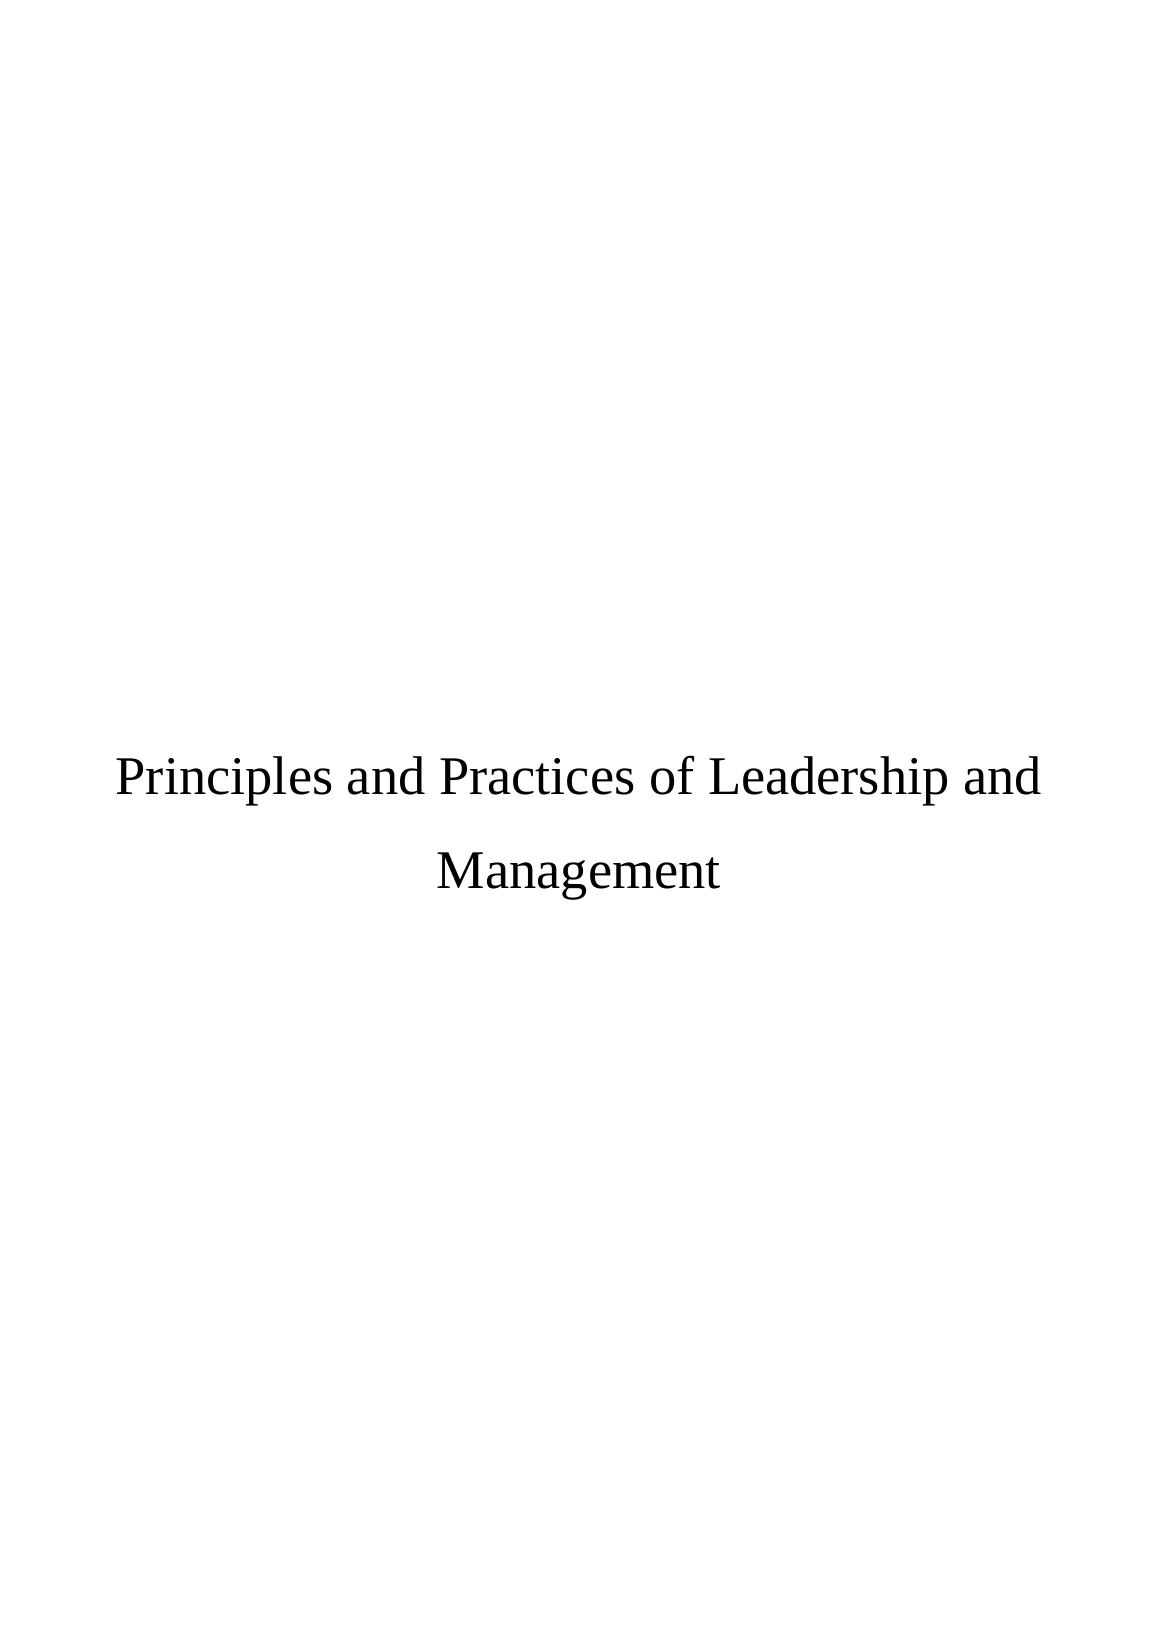 Leadership and Management -  Assignment_1